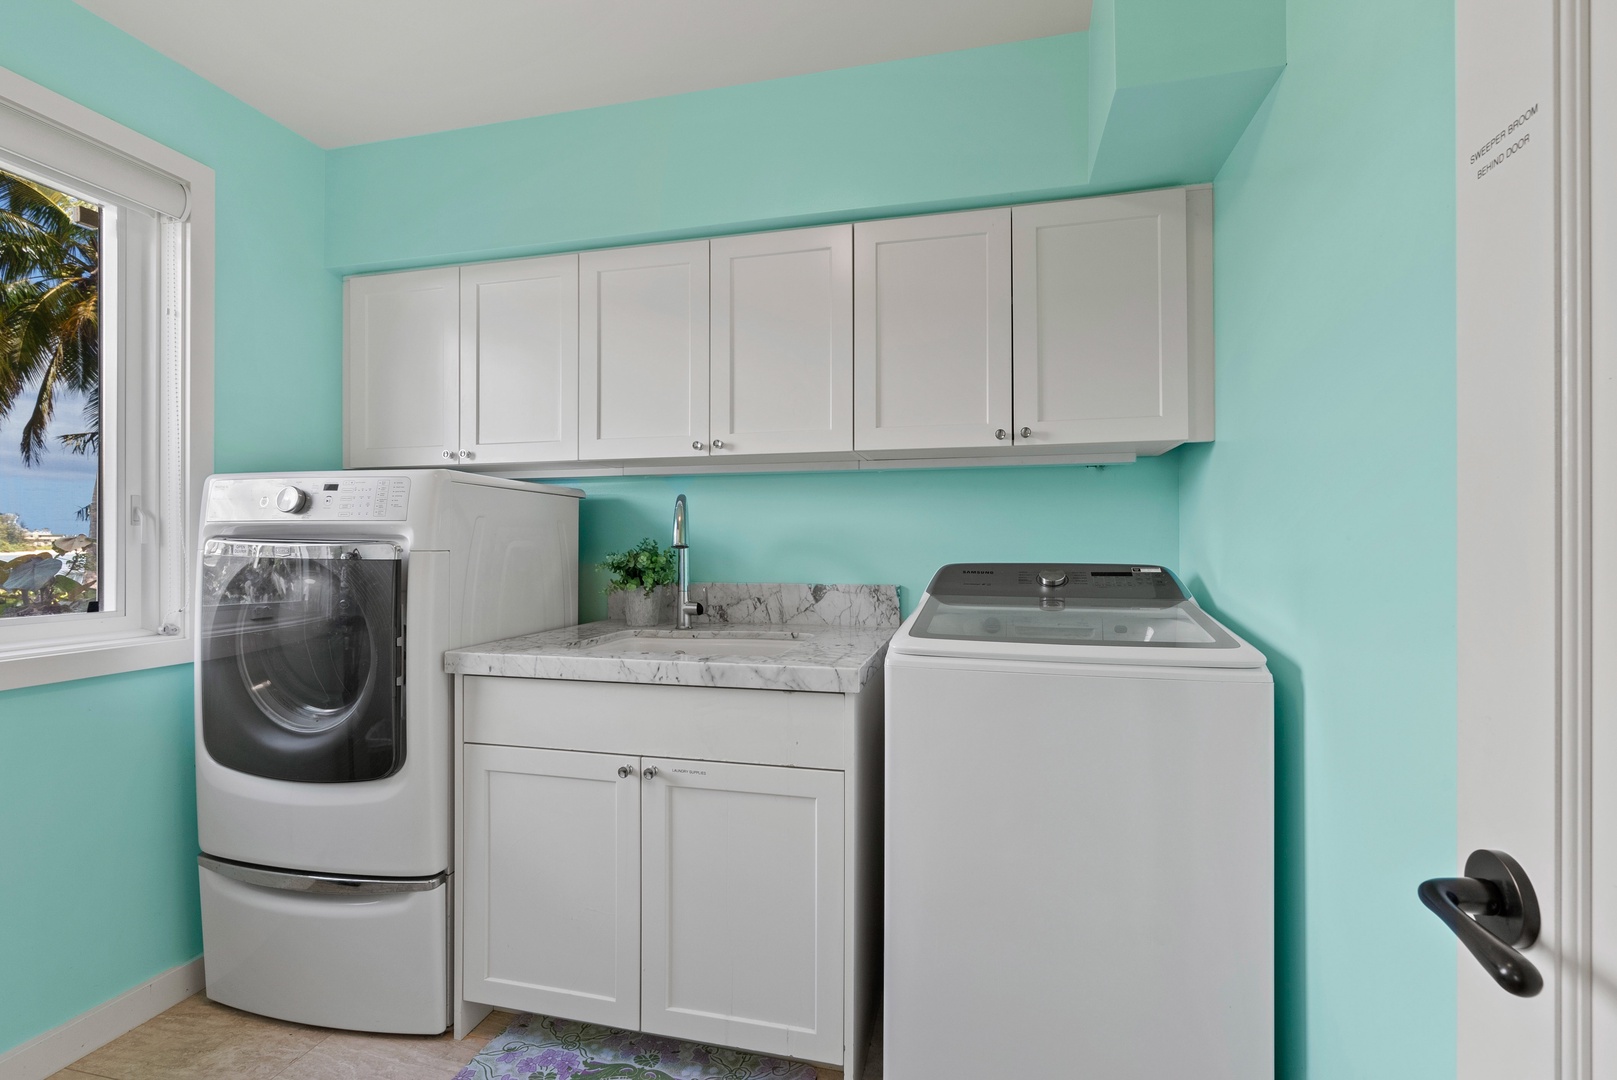 Waialua Vacation Rentals, Waialua Beachfront Getaway - Dedicated laundry room with full-size washer and dryer